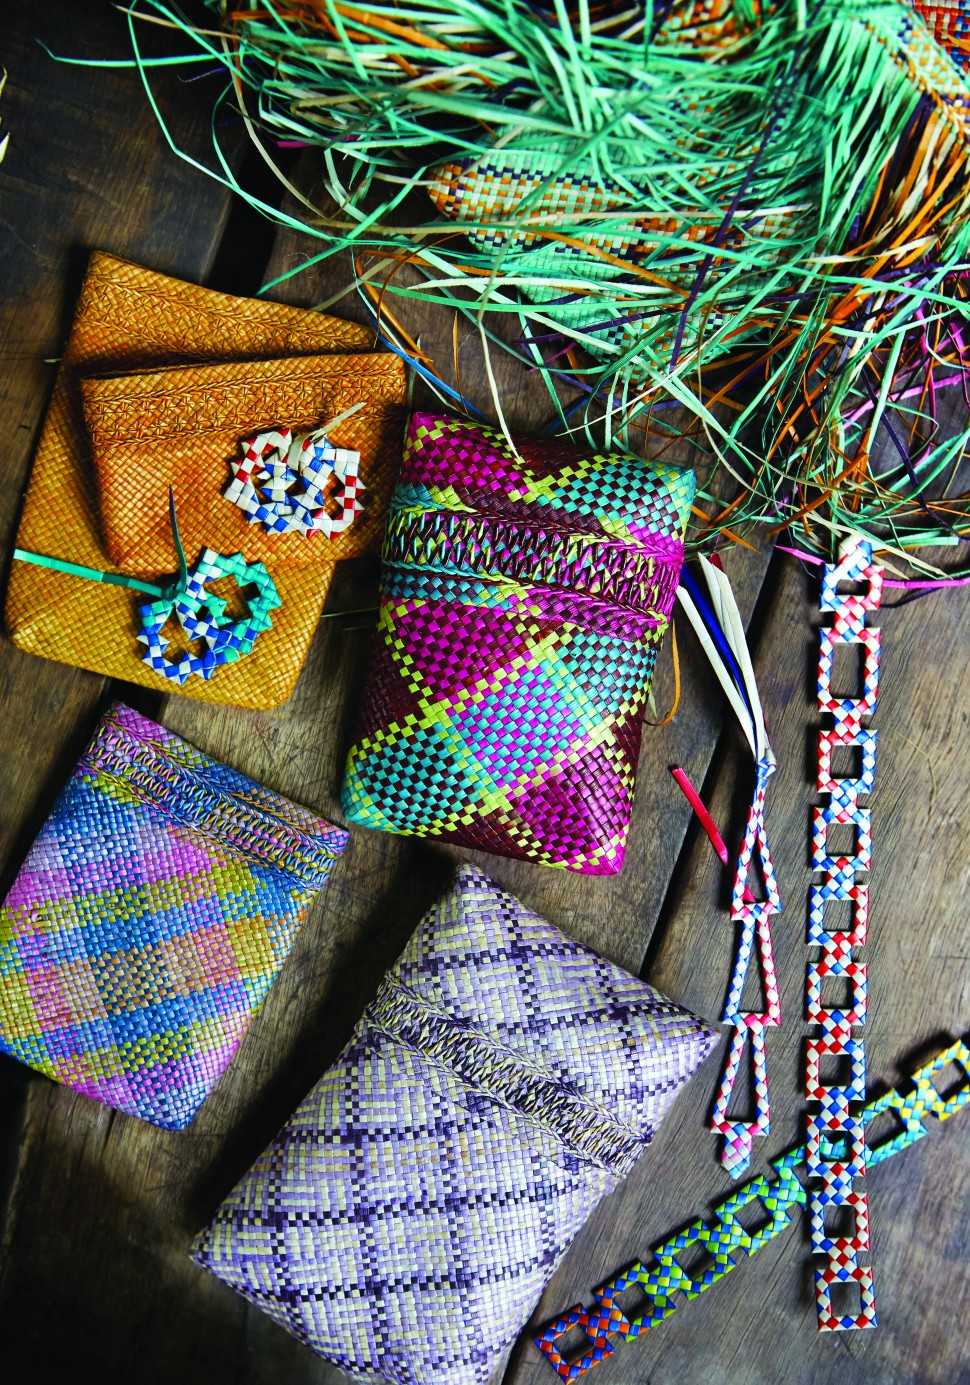 Beautiful bookmarks, pouches, bags and other handcrafted items made by Mah Meri artisans